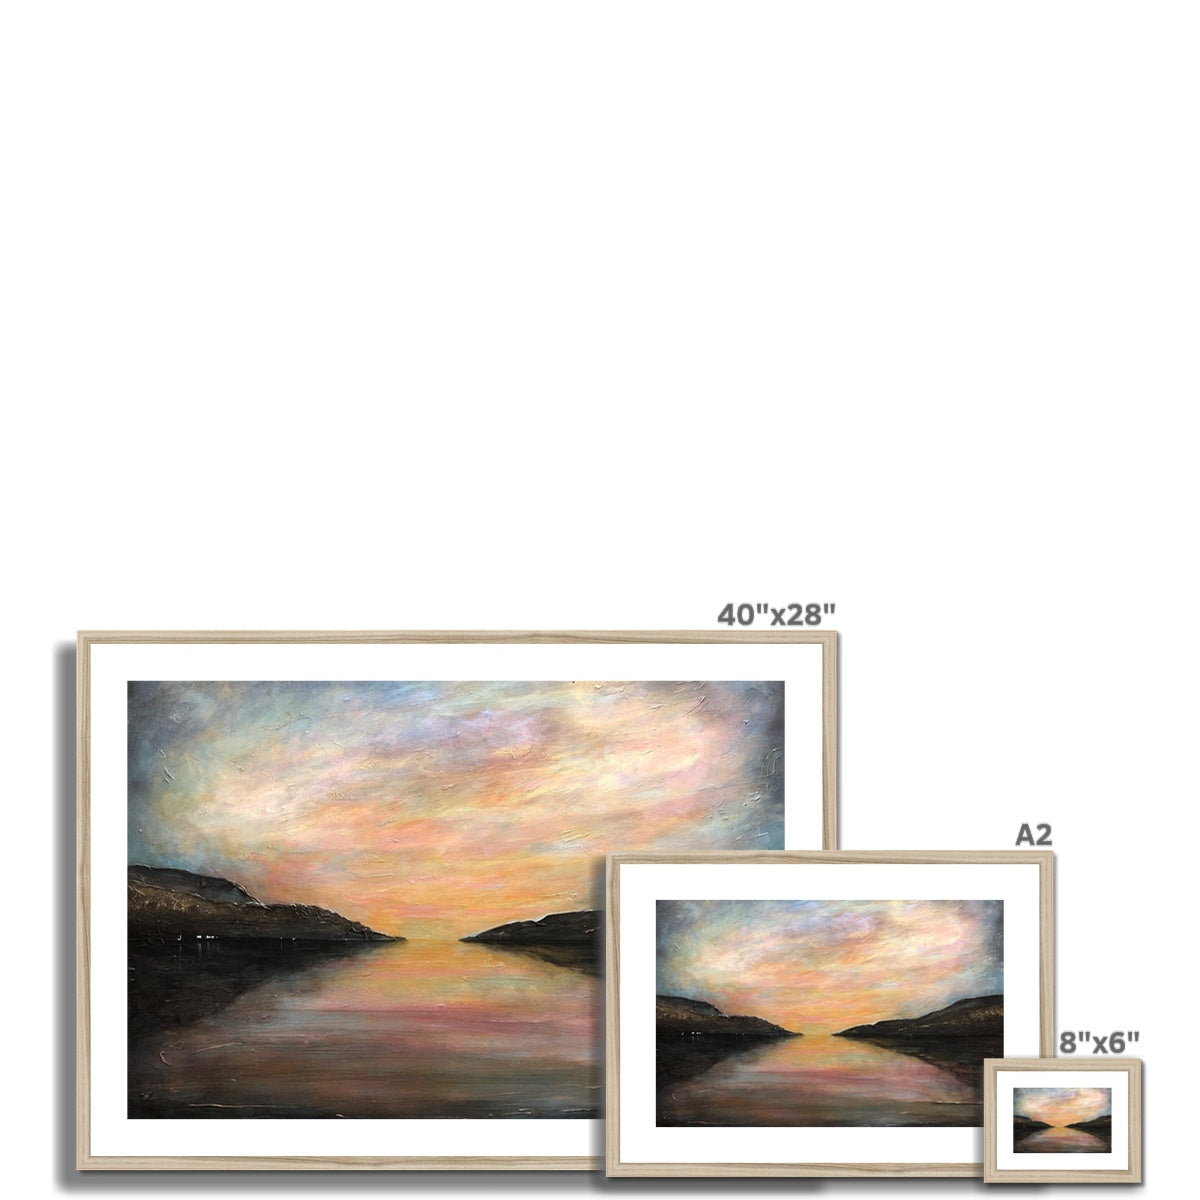 Loch Ness Glow Painting | Framed & Mounted Prints From Scotland-Framed & Mounted Prints-Scottish Lochs & Mountains Art Gallery-Paintings, Prints, Homeware, Art Gifts From Scotland By Scottish Artist Kevin Hunter